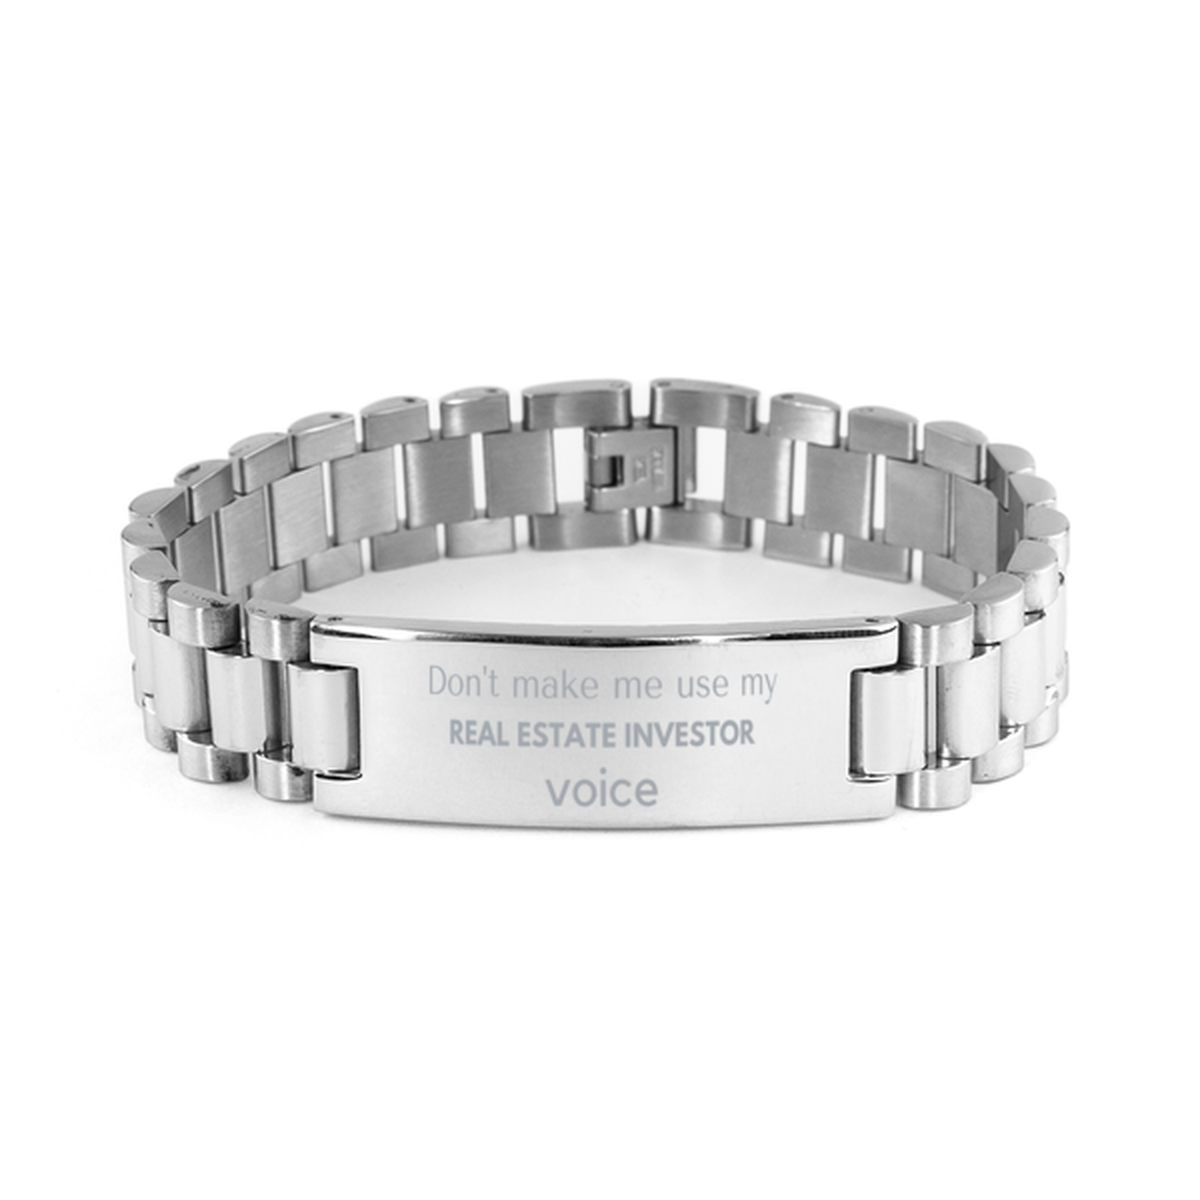 Don't make me use my Real Estate Investor voice, Sarcasm Real Estate Investor Gifts, Christmas Real Estate Investor Ladder Stainless Steel Bracelet Birthday Unique Gifts For Real Estate Investor Coworkers, Men, Women, Colleague, Friends